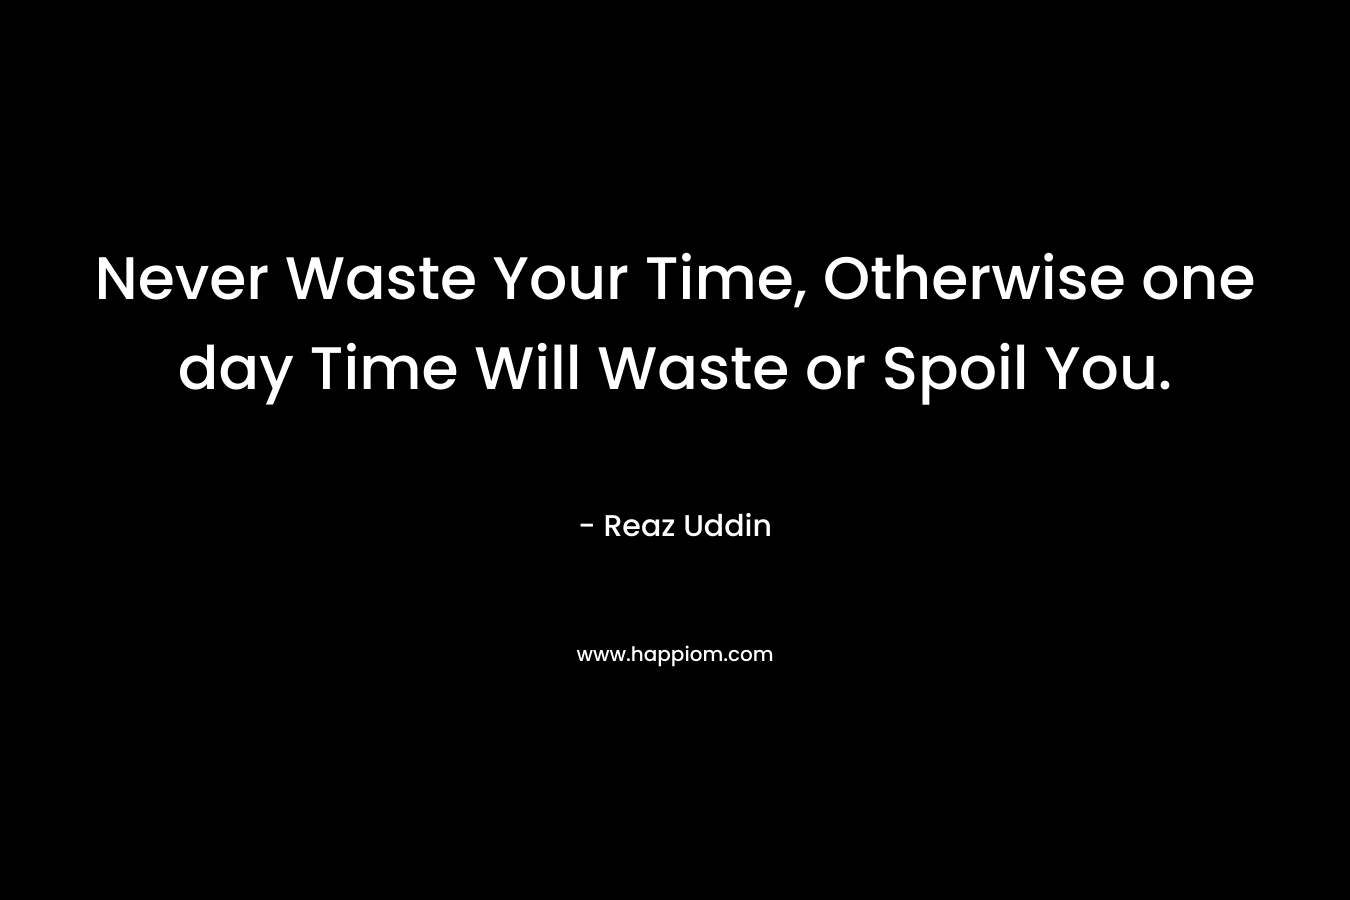 Never Waste Your Time, Otherwise one day Time Will Waste or Spoil You. – Reaz Uddin